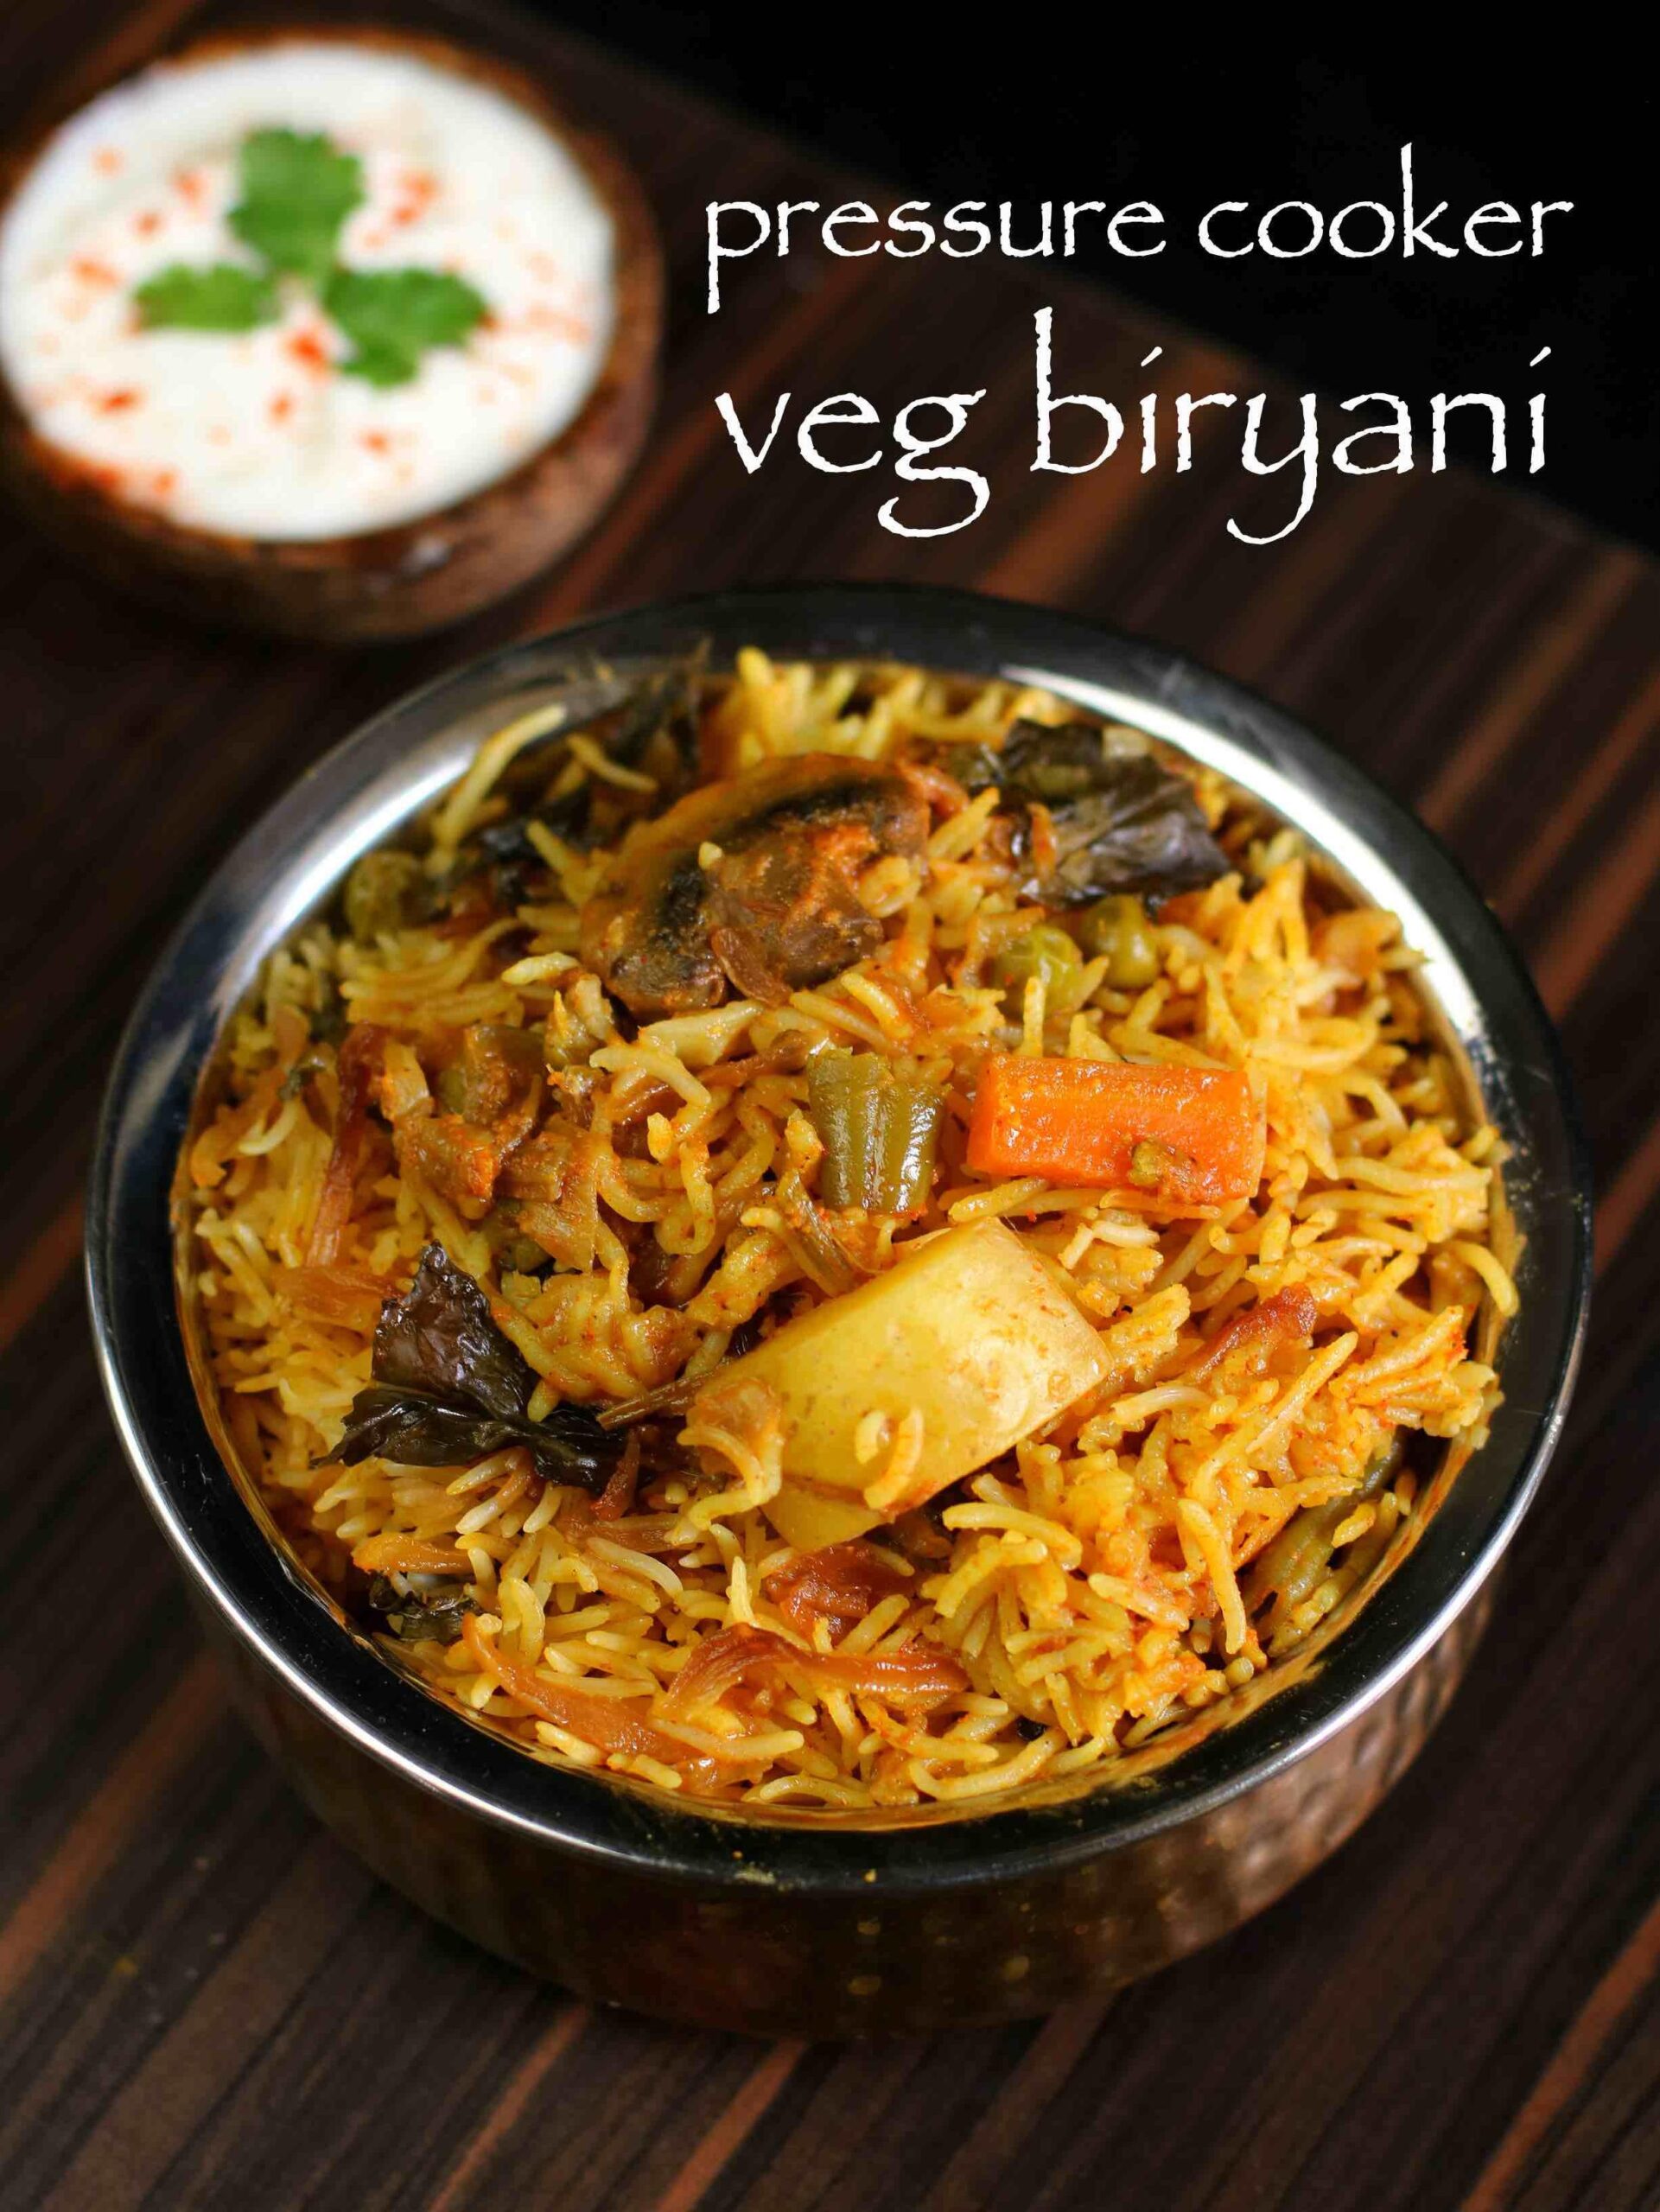  A vegetarian version of a traditional Indian dish that will leave you feeling satisfied and nourished!